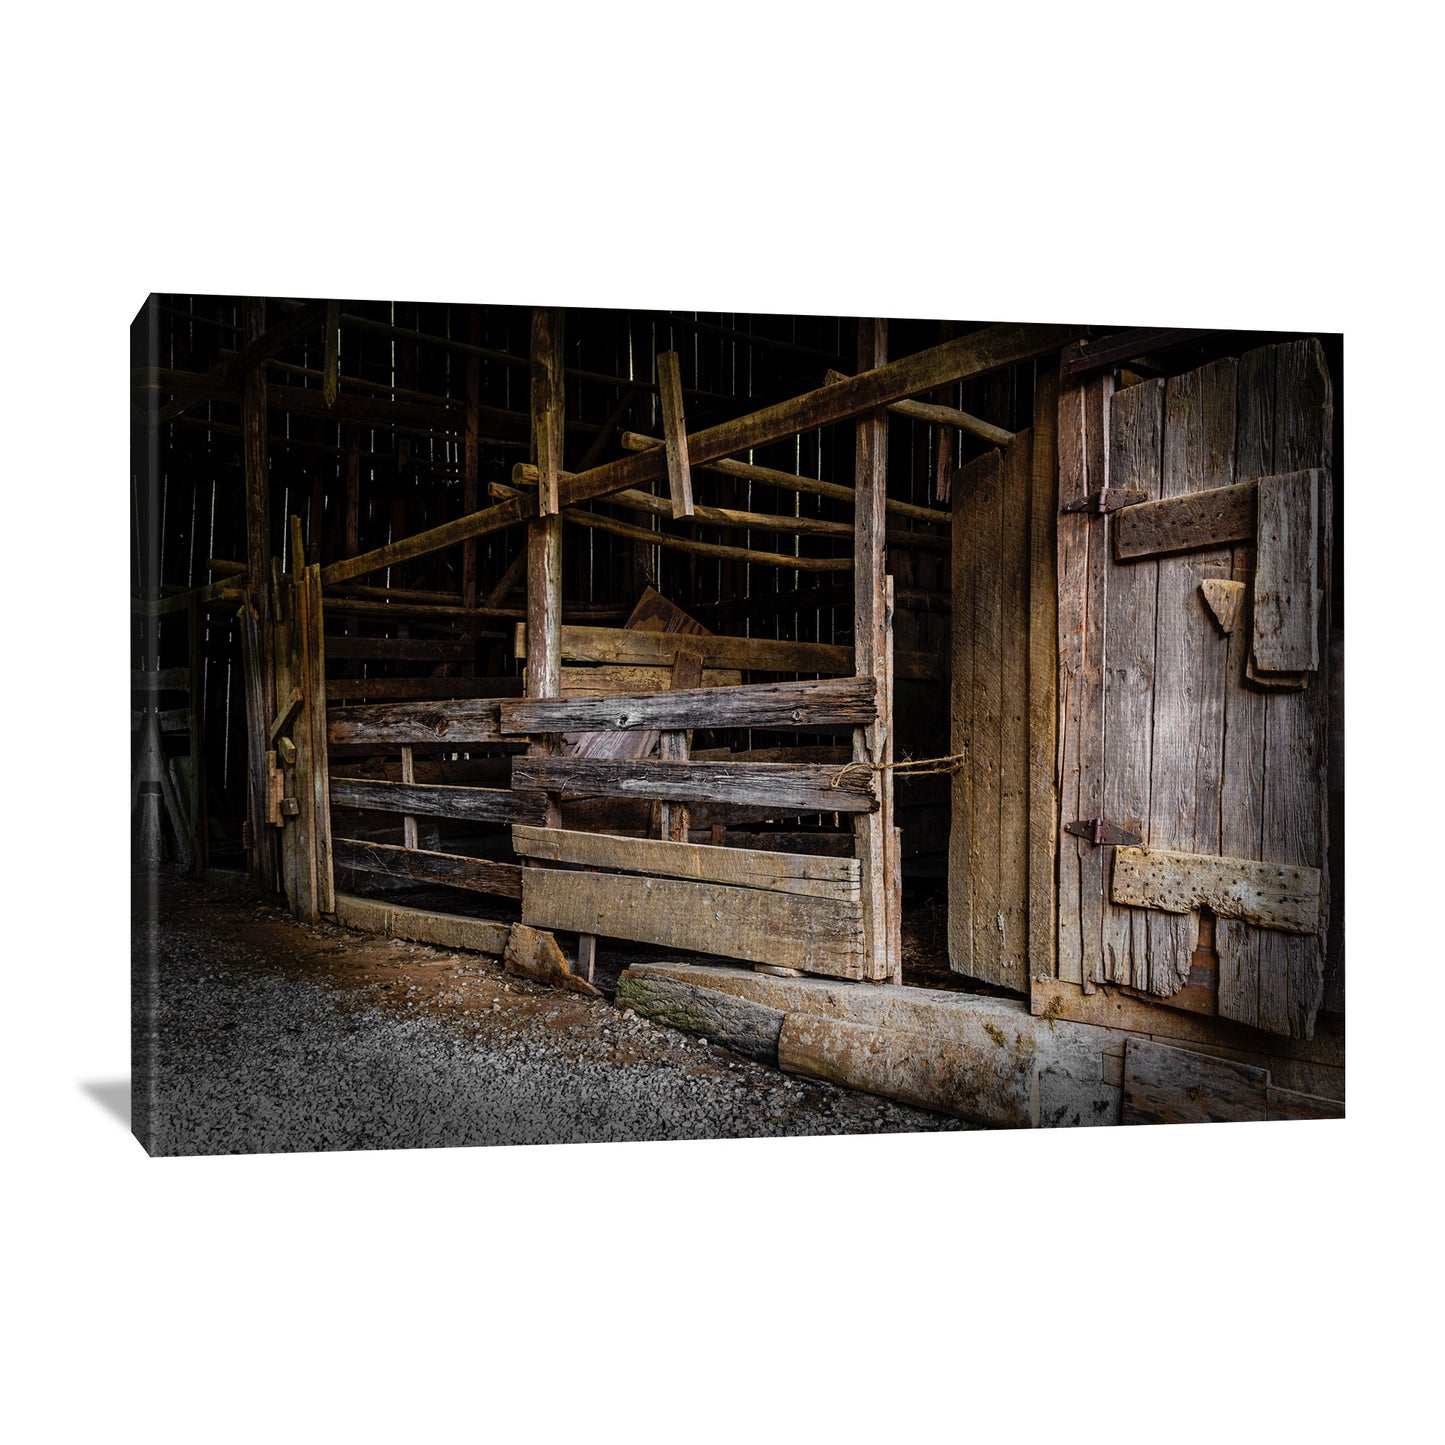 Canvas wall art featuring the interior of an abandoned Appalachian barn